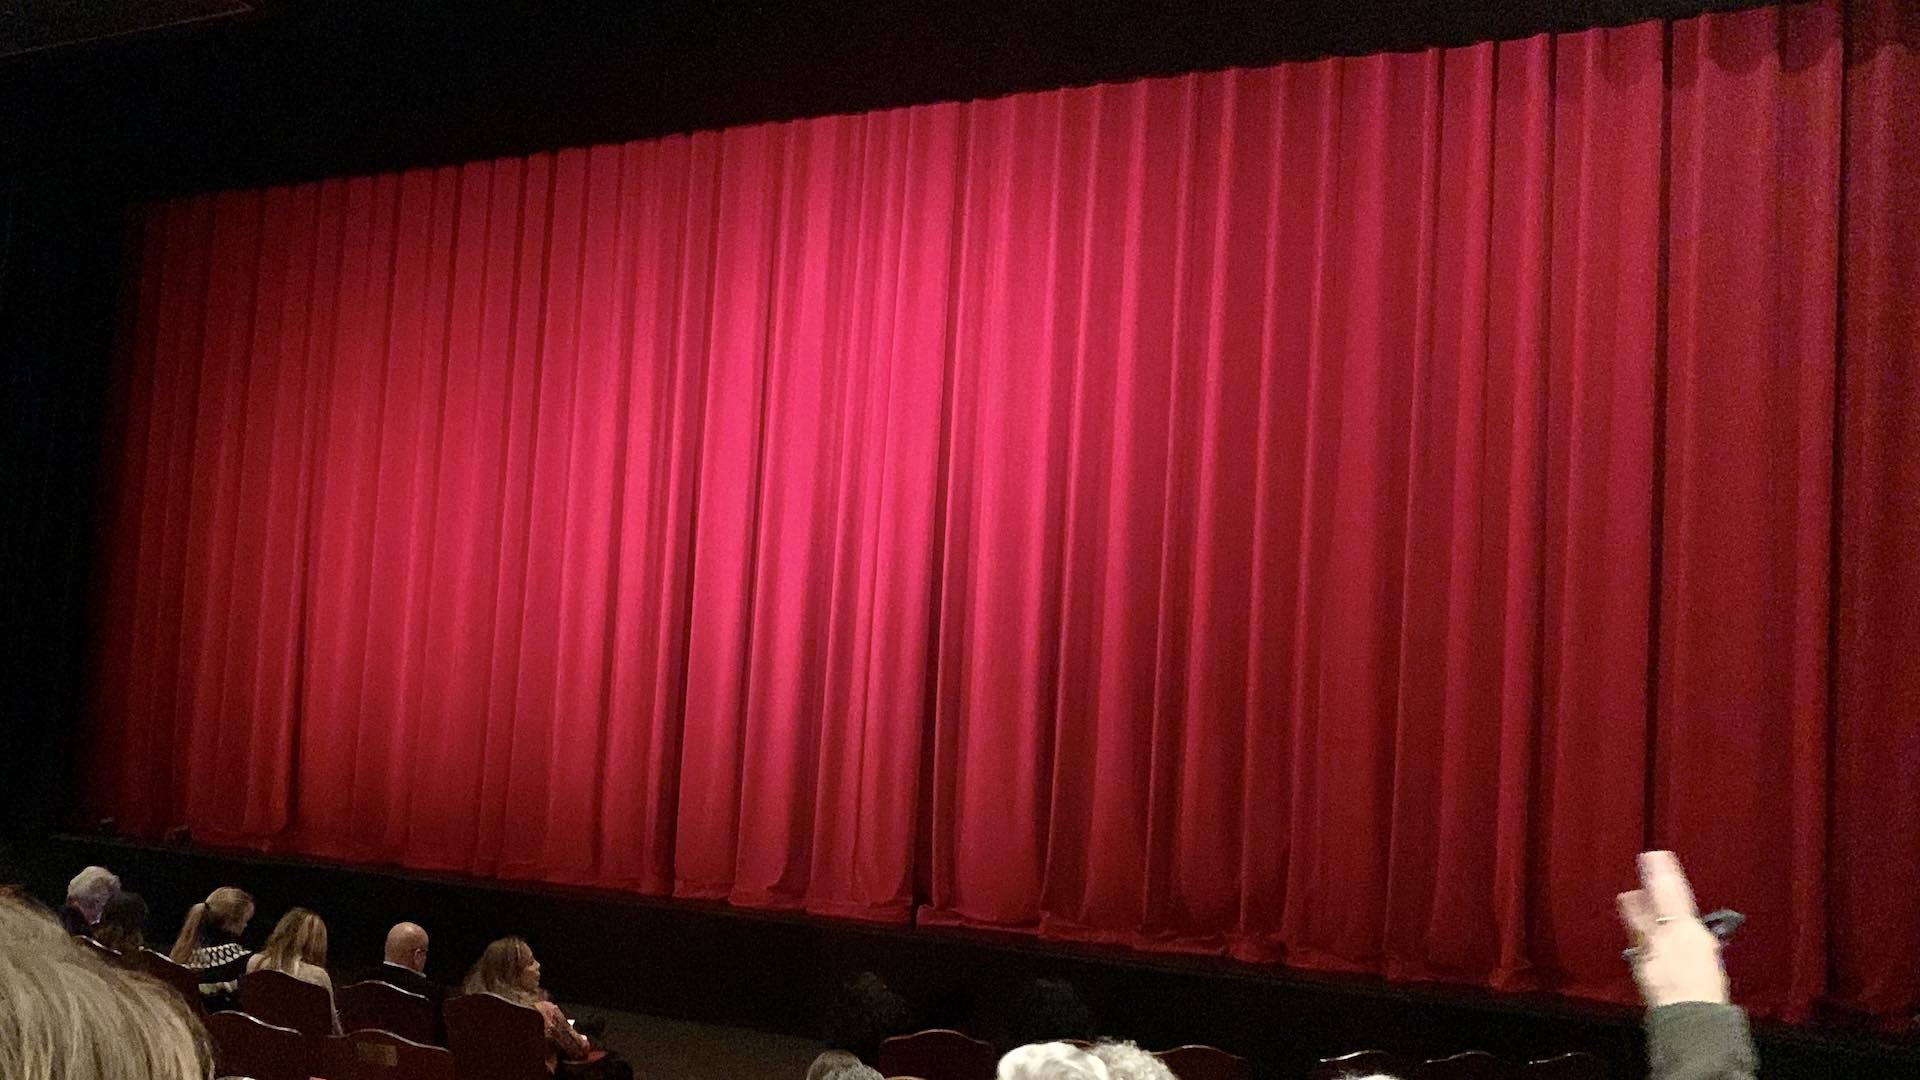 By the end of the month, we were both feeling good again and ready to begin the spring theater season! Our local university put on a dance performance—featuring a friend of ours—to kickoff the season.